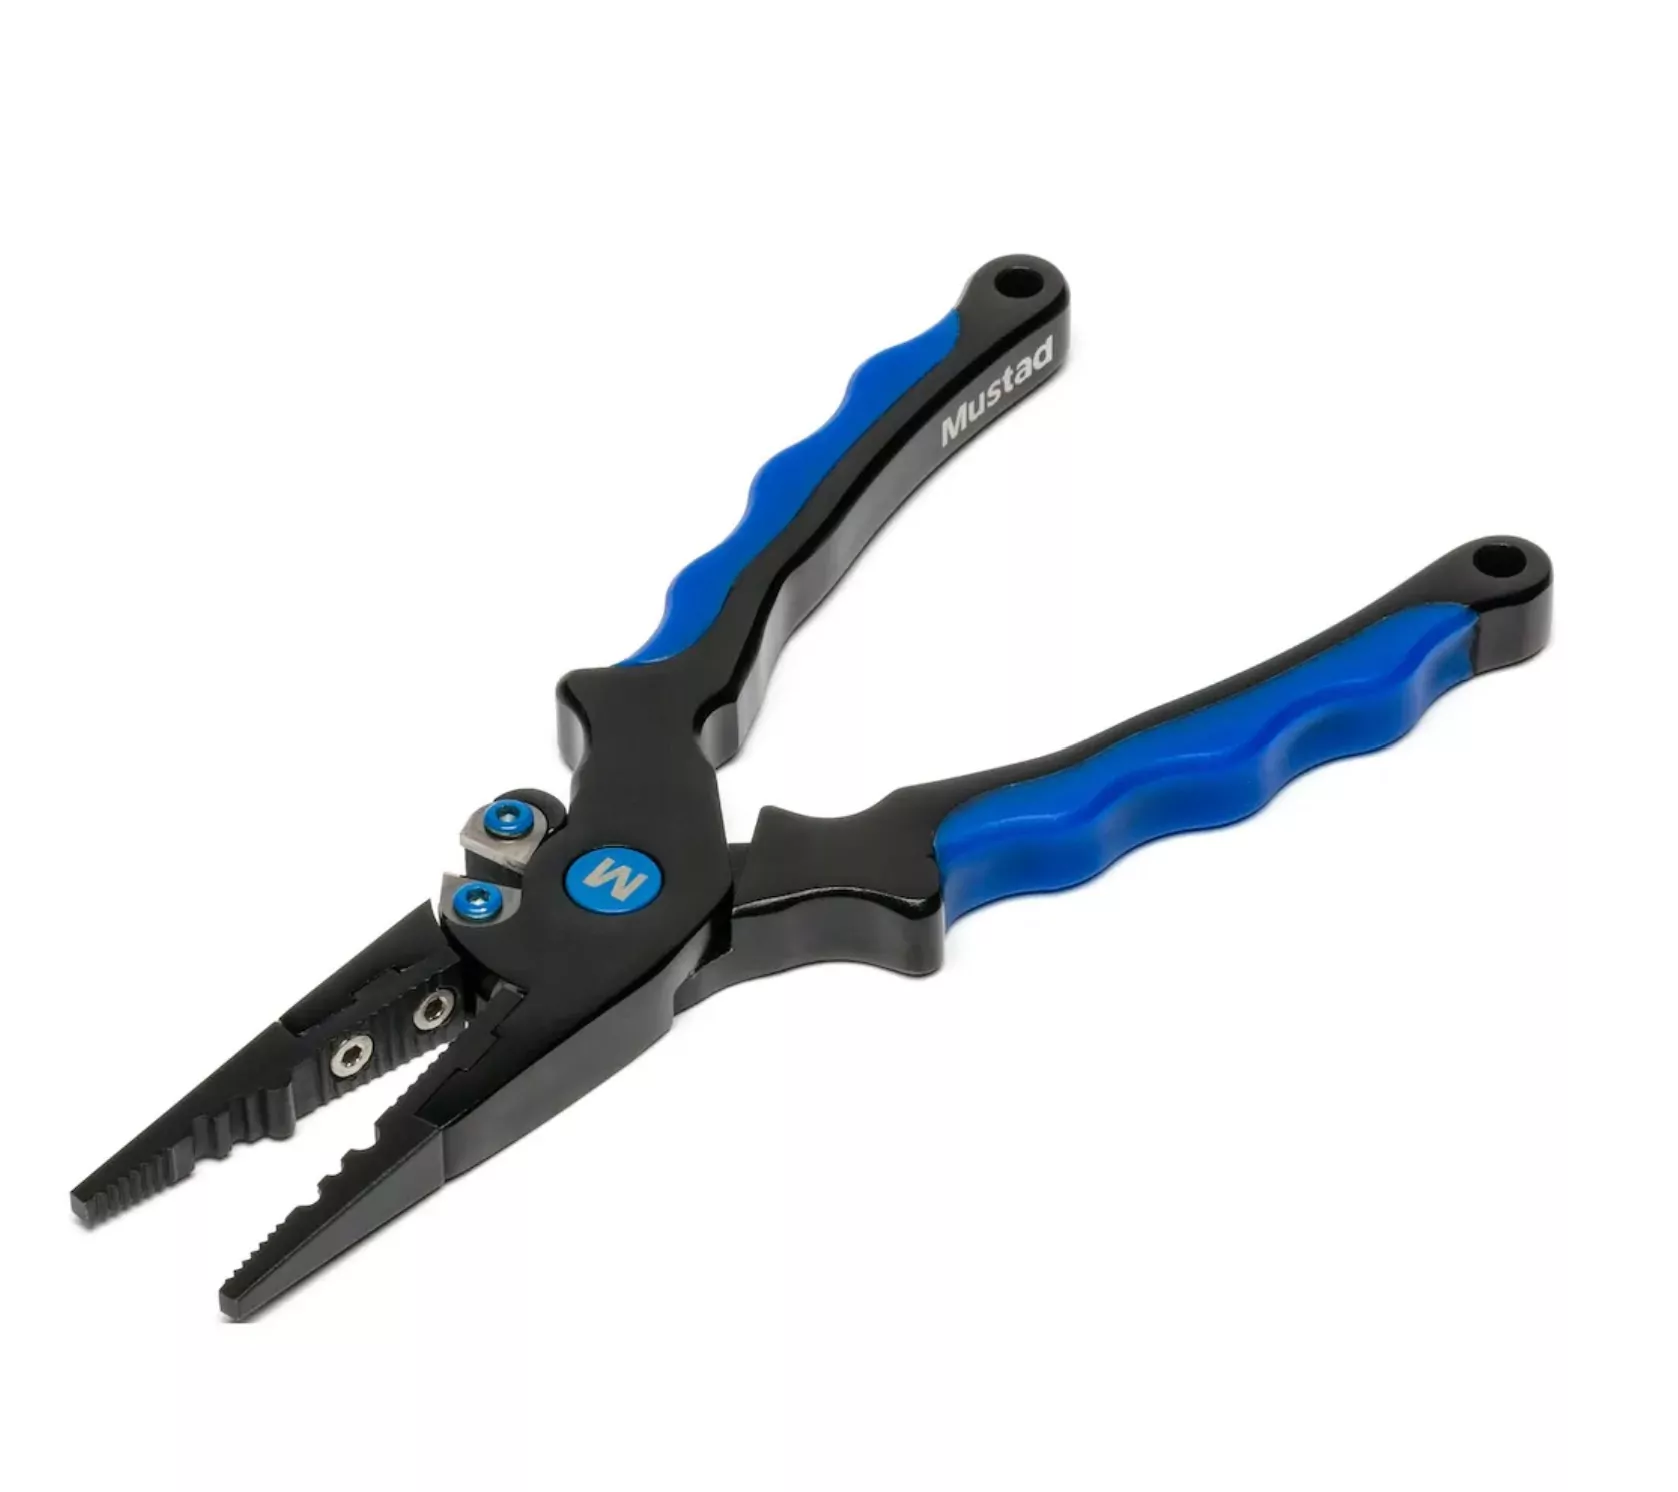 MUSTAD MT111 Aluminum Fishing Pliers with Sheath: Tools Online at